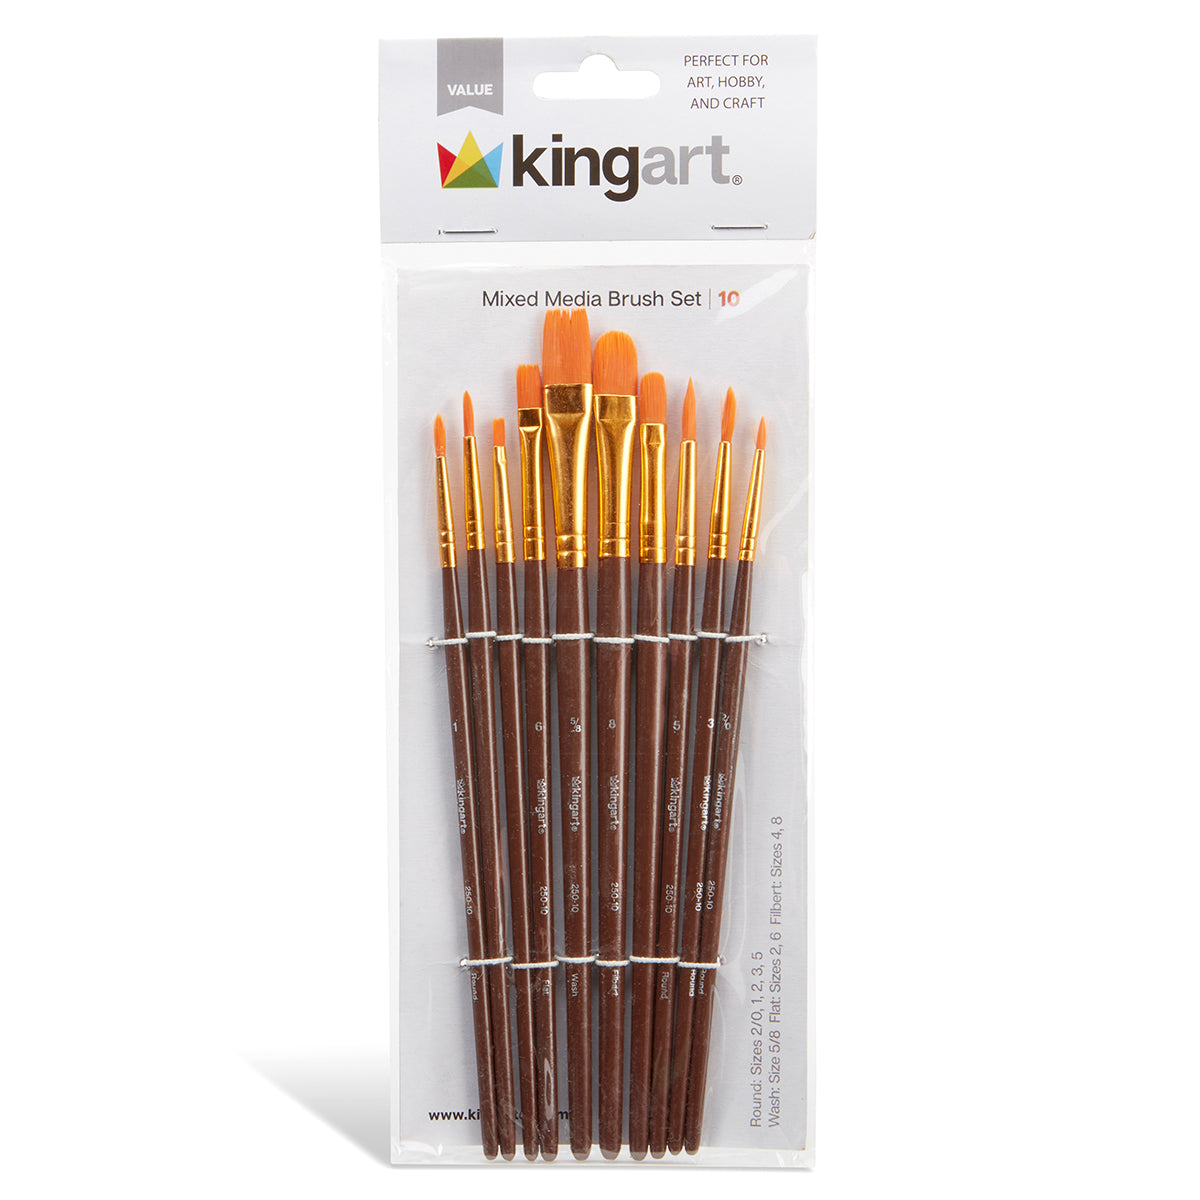  KINGART 242-20 Foam 20 Pc. Value Pack 2 Brush Set, Short Wood  Handle, for Oil, Acrylic & Watercolor Paint, Great for Crafts, DIY Home  Projects, Hobbies & Group Activities : Arts